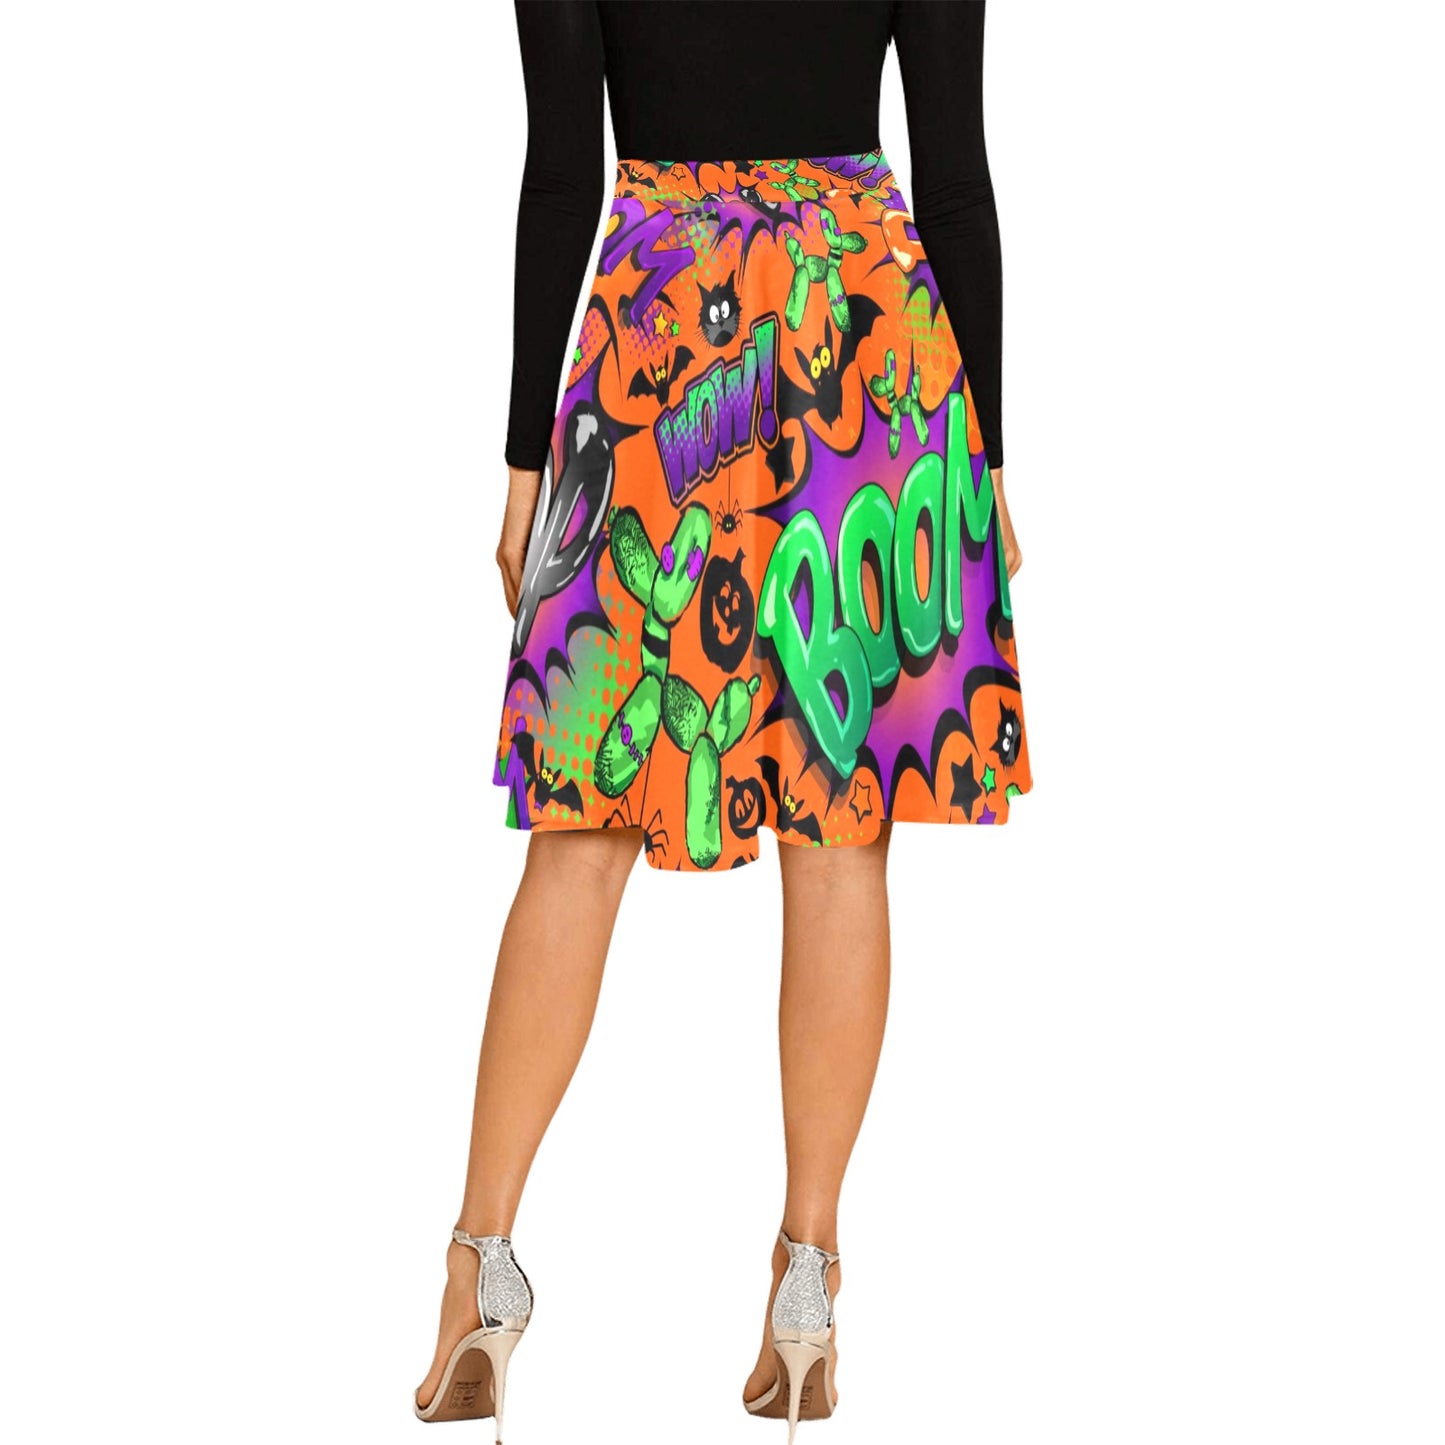 Balloon Twister Skirt for Halloween Costume and Events